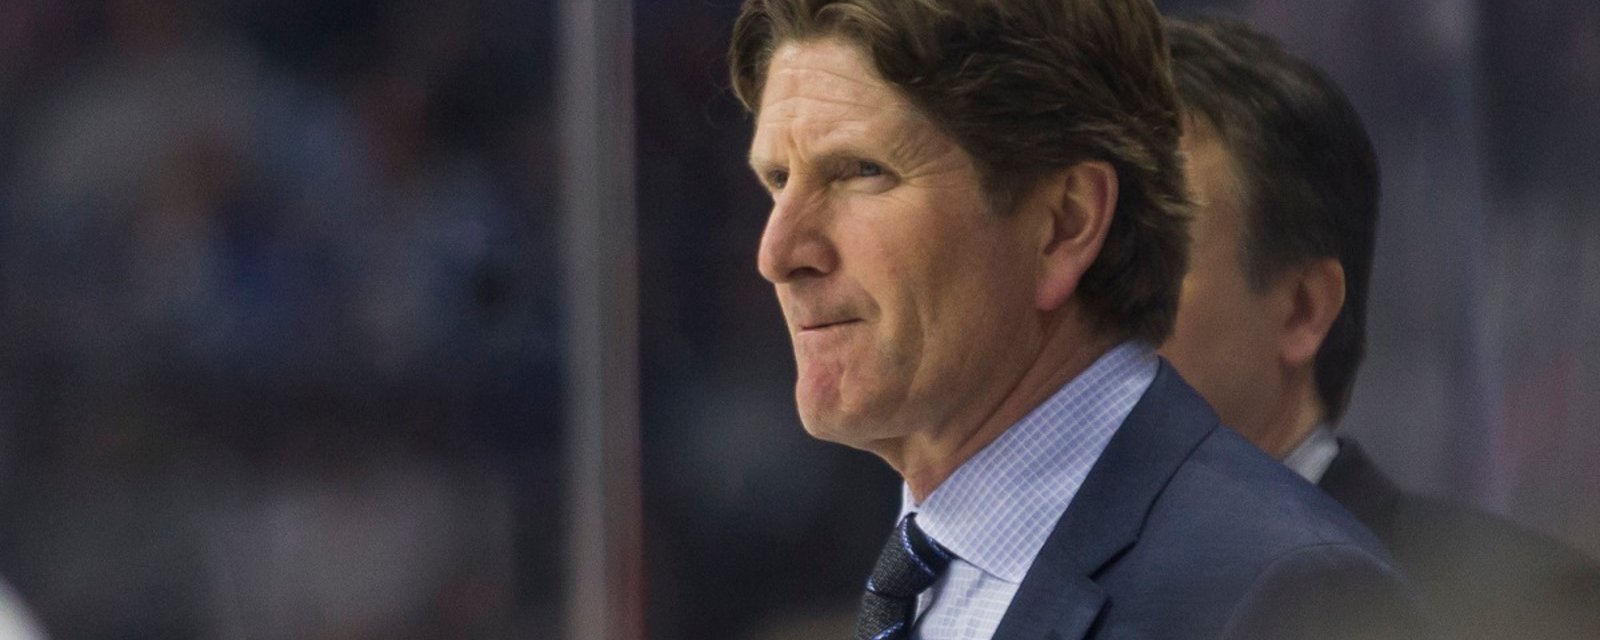 Leafs coach Mike Babcock spotted scouting at playoff game. 